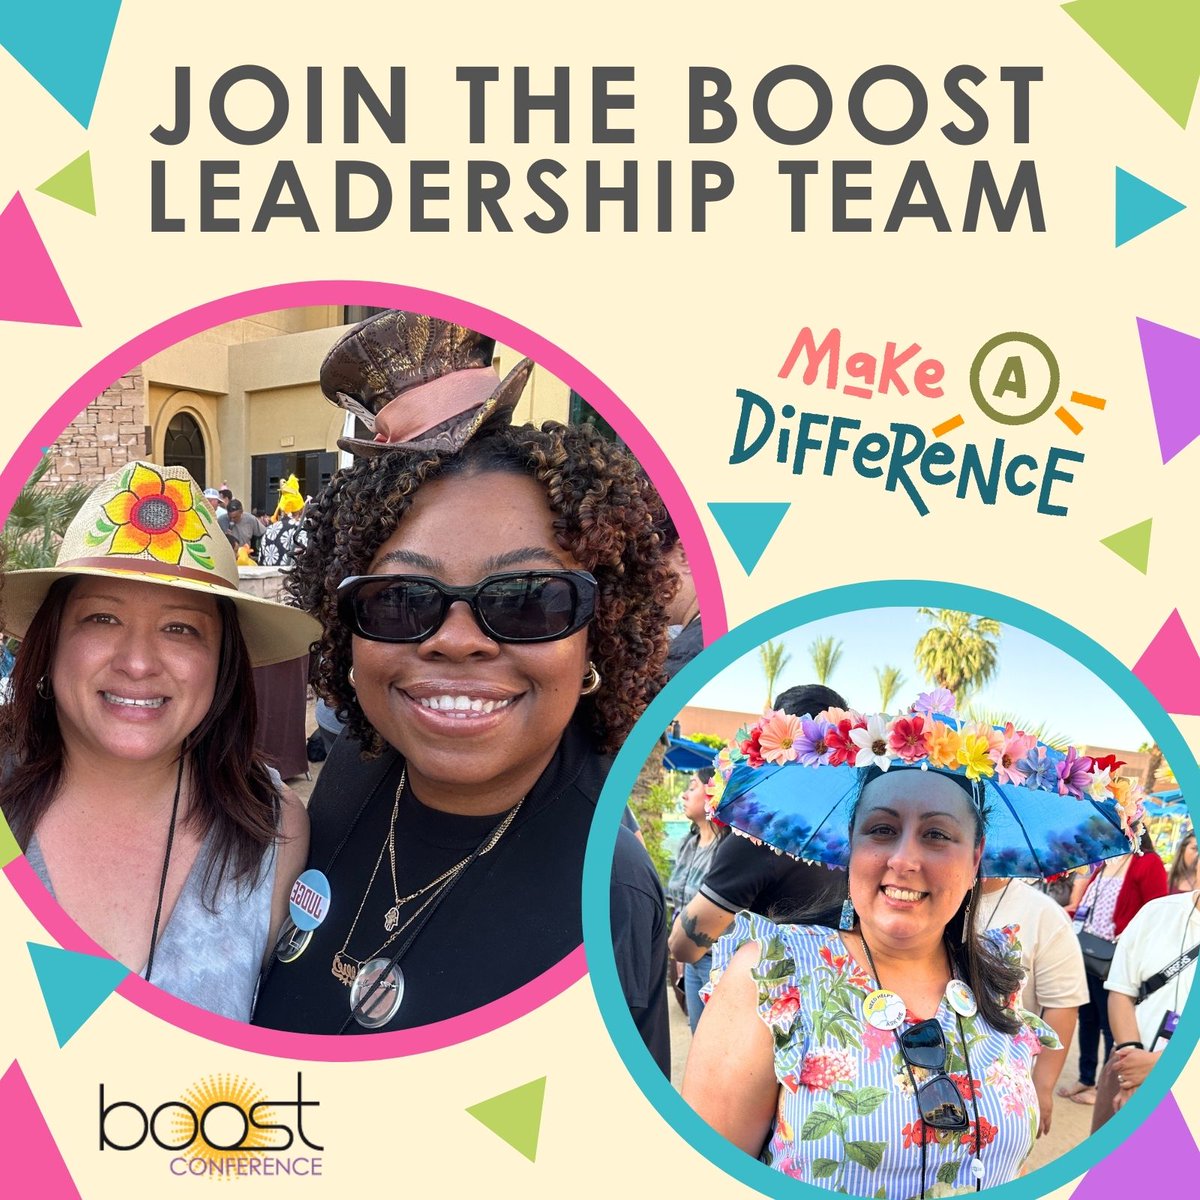 Are you looking to make a difference for youth? Join our amazing BOOST Leadership Team, full of passionate leaders and educators in the field. Help bring high-quality PD to educators at the #boostconference; submit your interest now until 5/31! bit.ly/BLTinterestlist